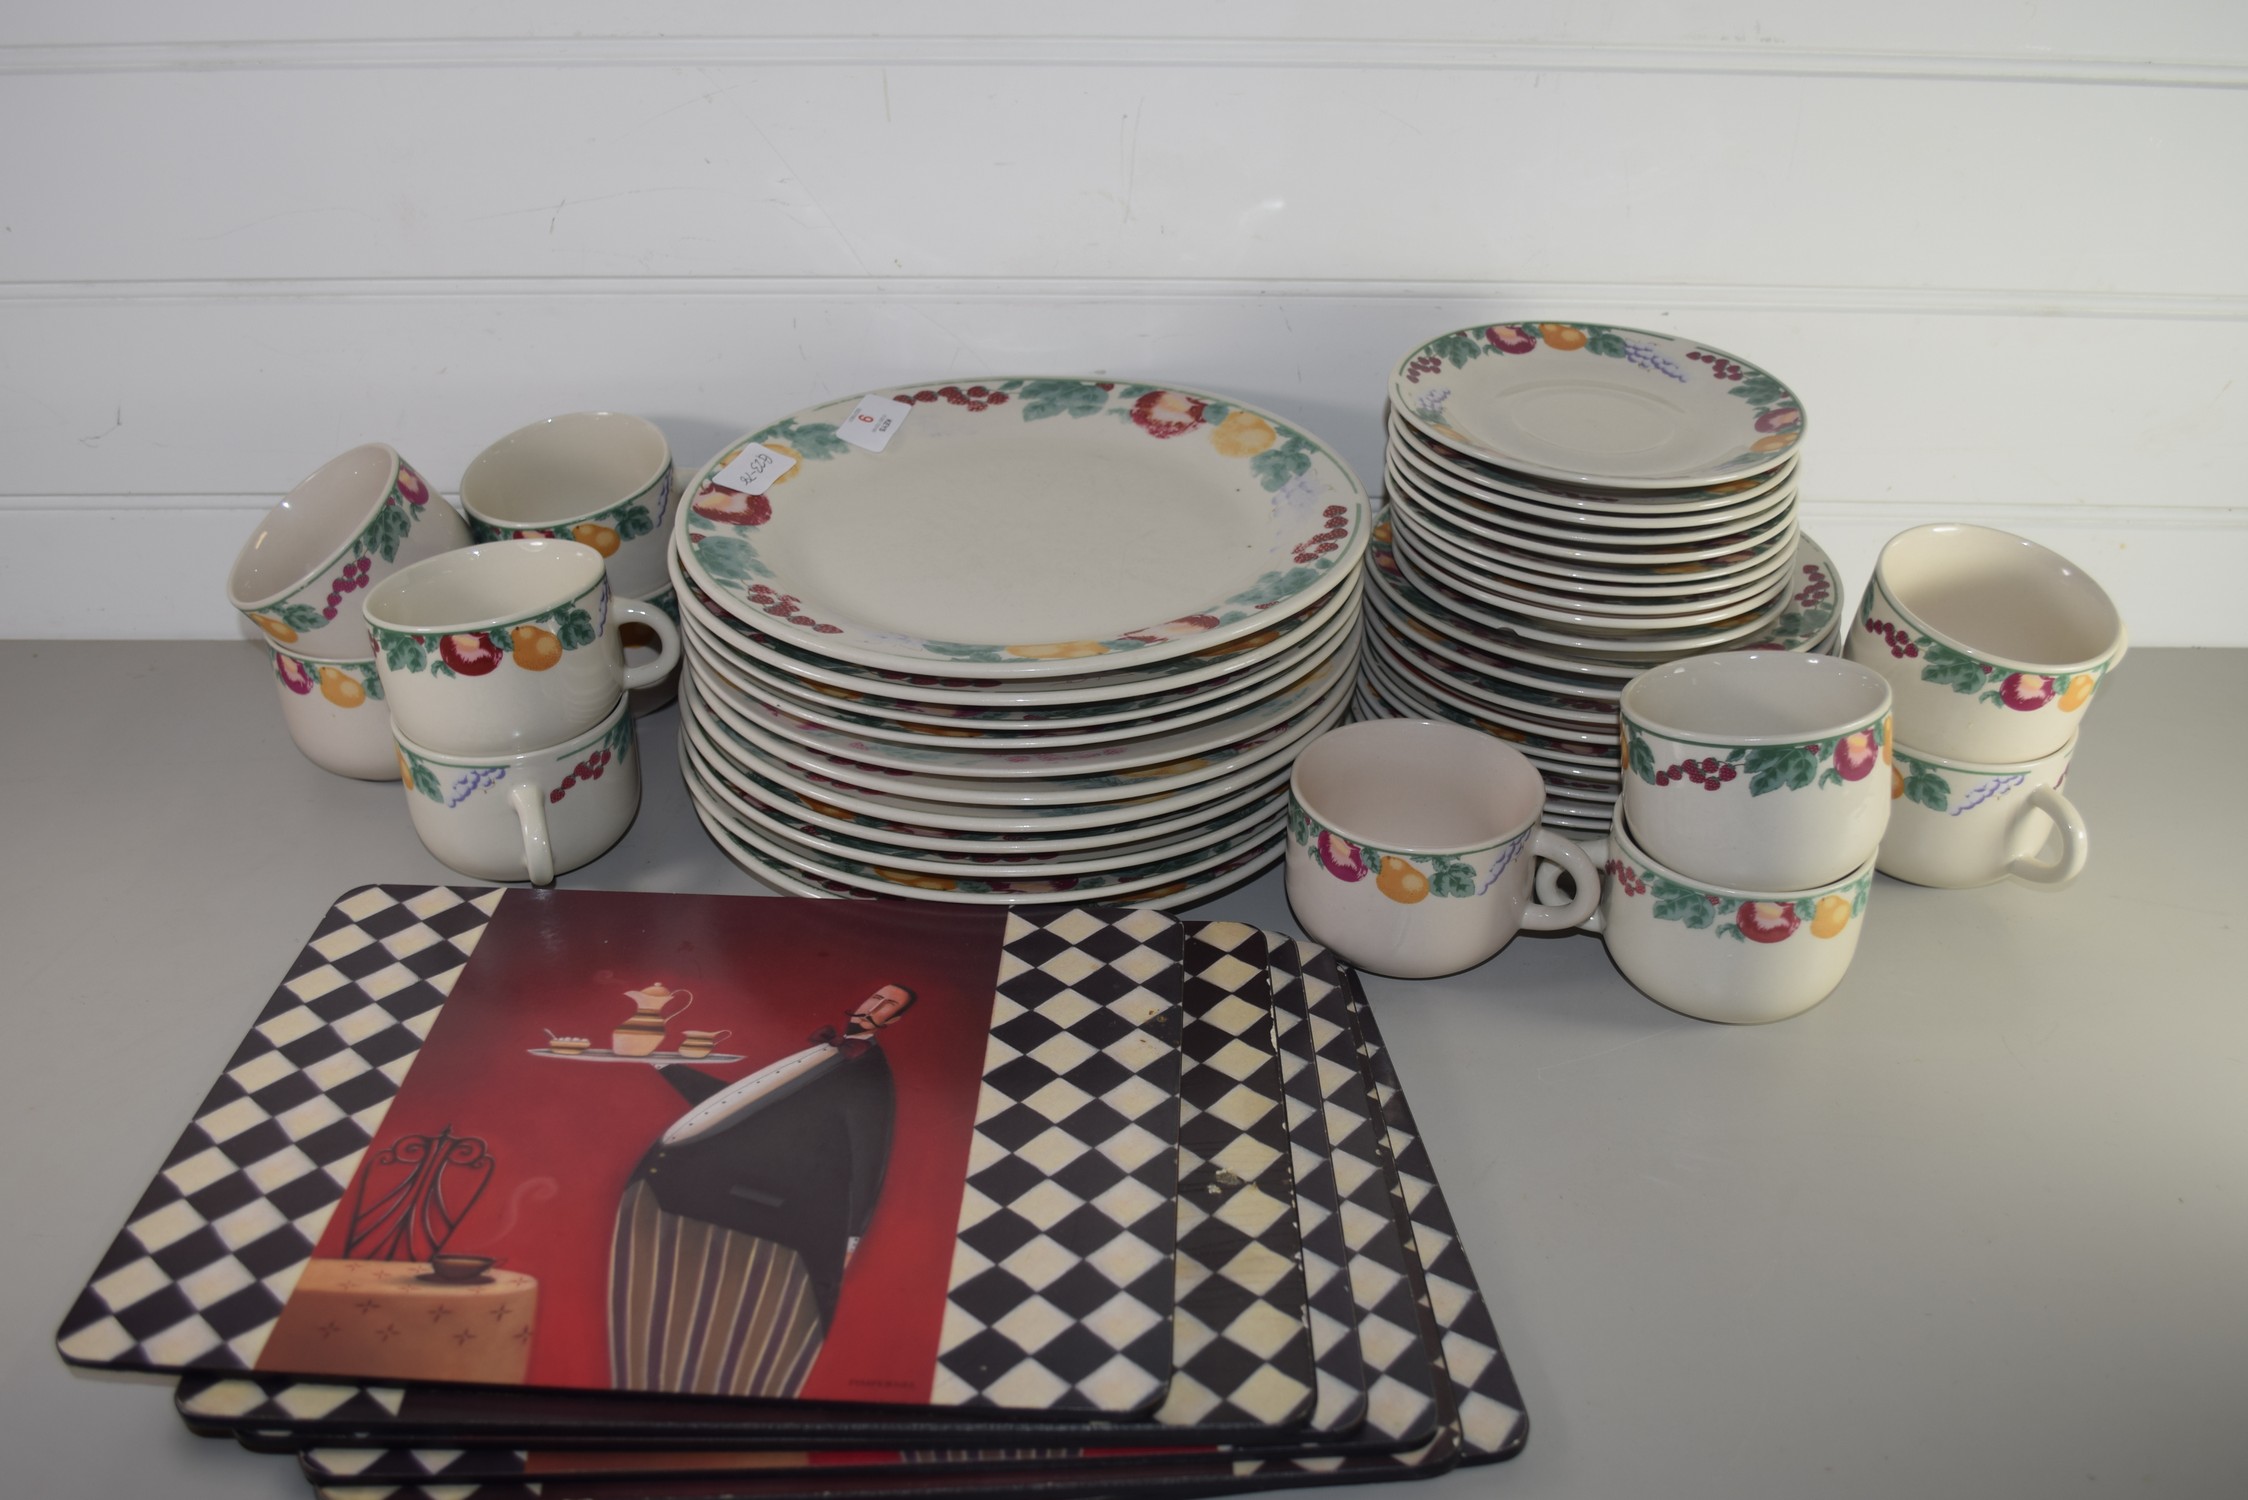 CERAMIC KITCHEN WARES, CUPS AND SAUCERS, DINNER PLATES, SIDE PLATES ETC